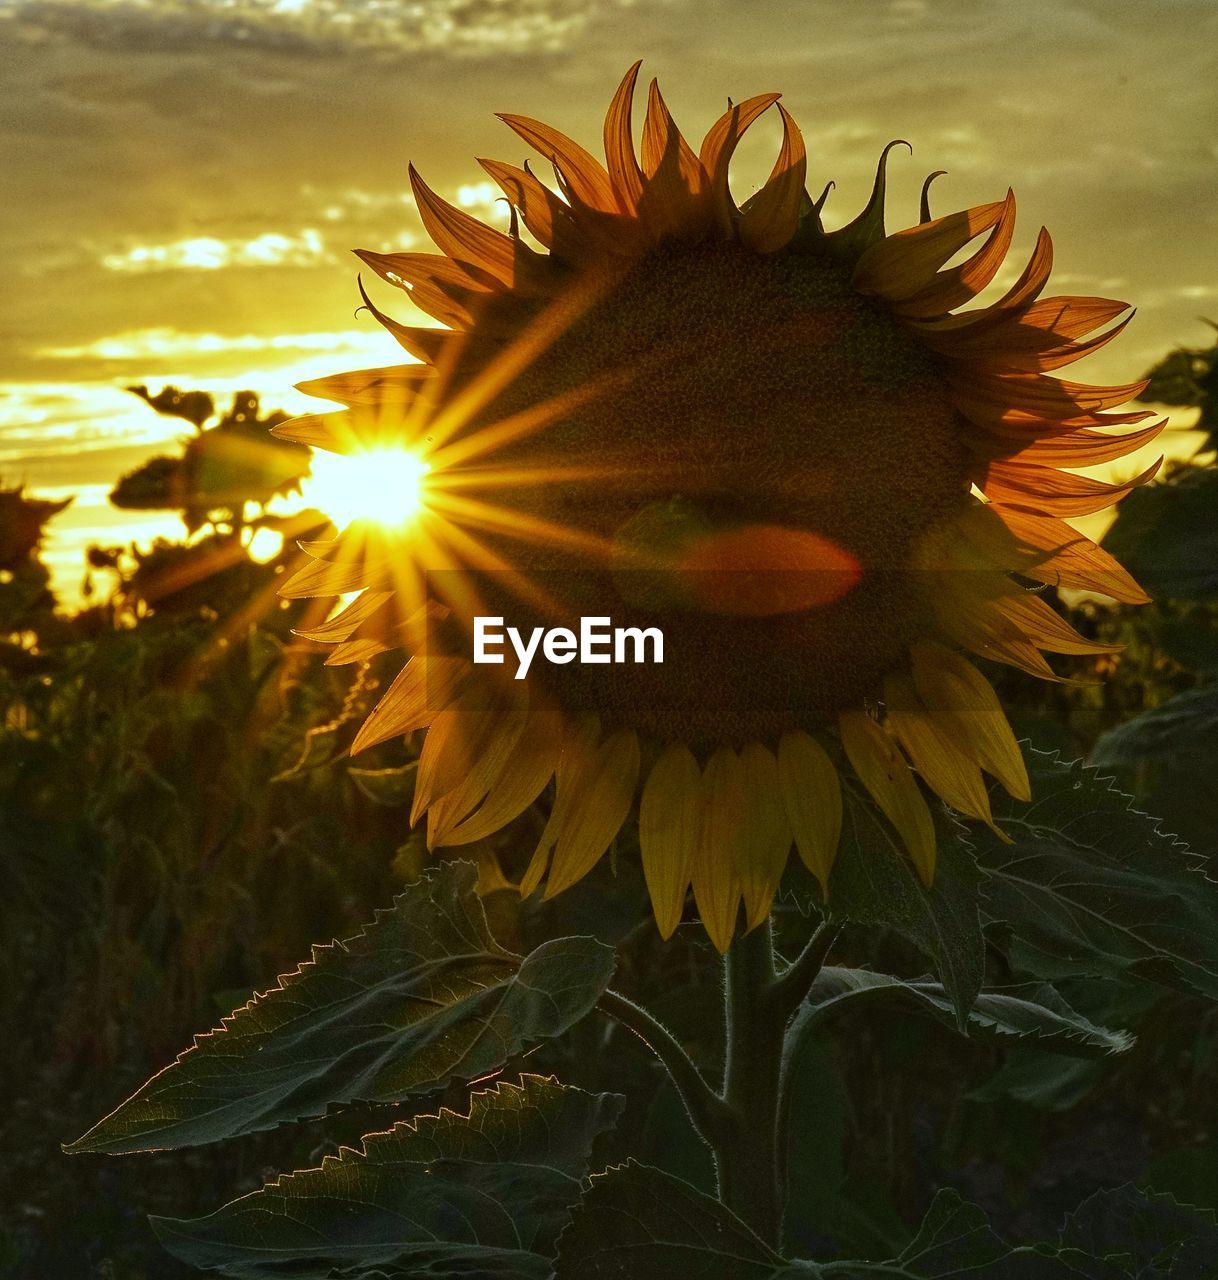 sunflower, plant, sky, nature, flower, beauty in nature, sunset, sunlight, yellow, growth, flowering plant, cloud, flower head, freshness, sun, fragility, close-up, sunflower seed, land, inflorescence, no people, sunbeam, field, landscape, lens flare, outdoors, petal, back lit, rural scene, tranquility, environment, leaf, plant part